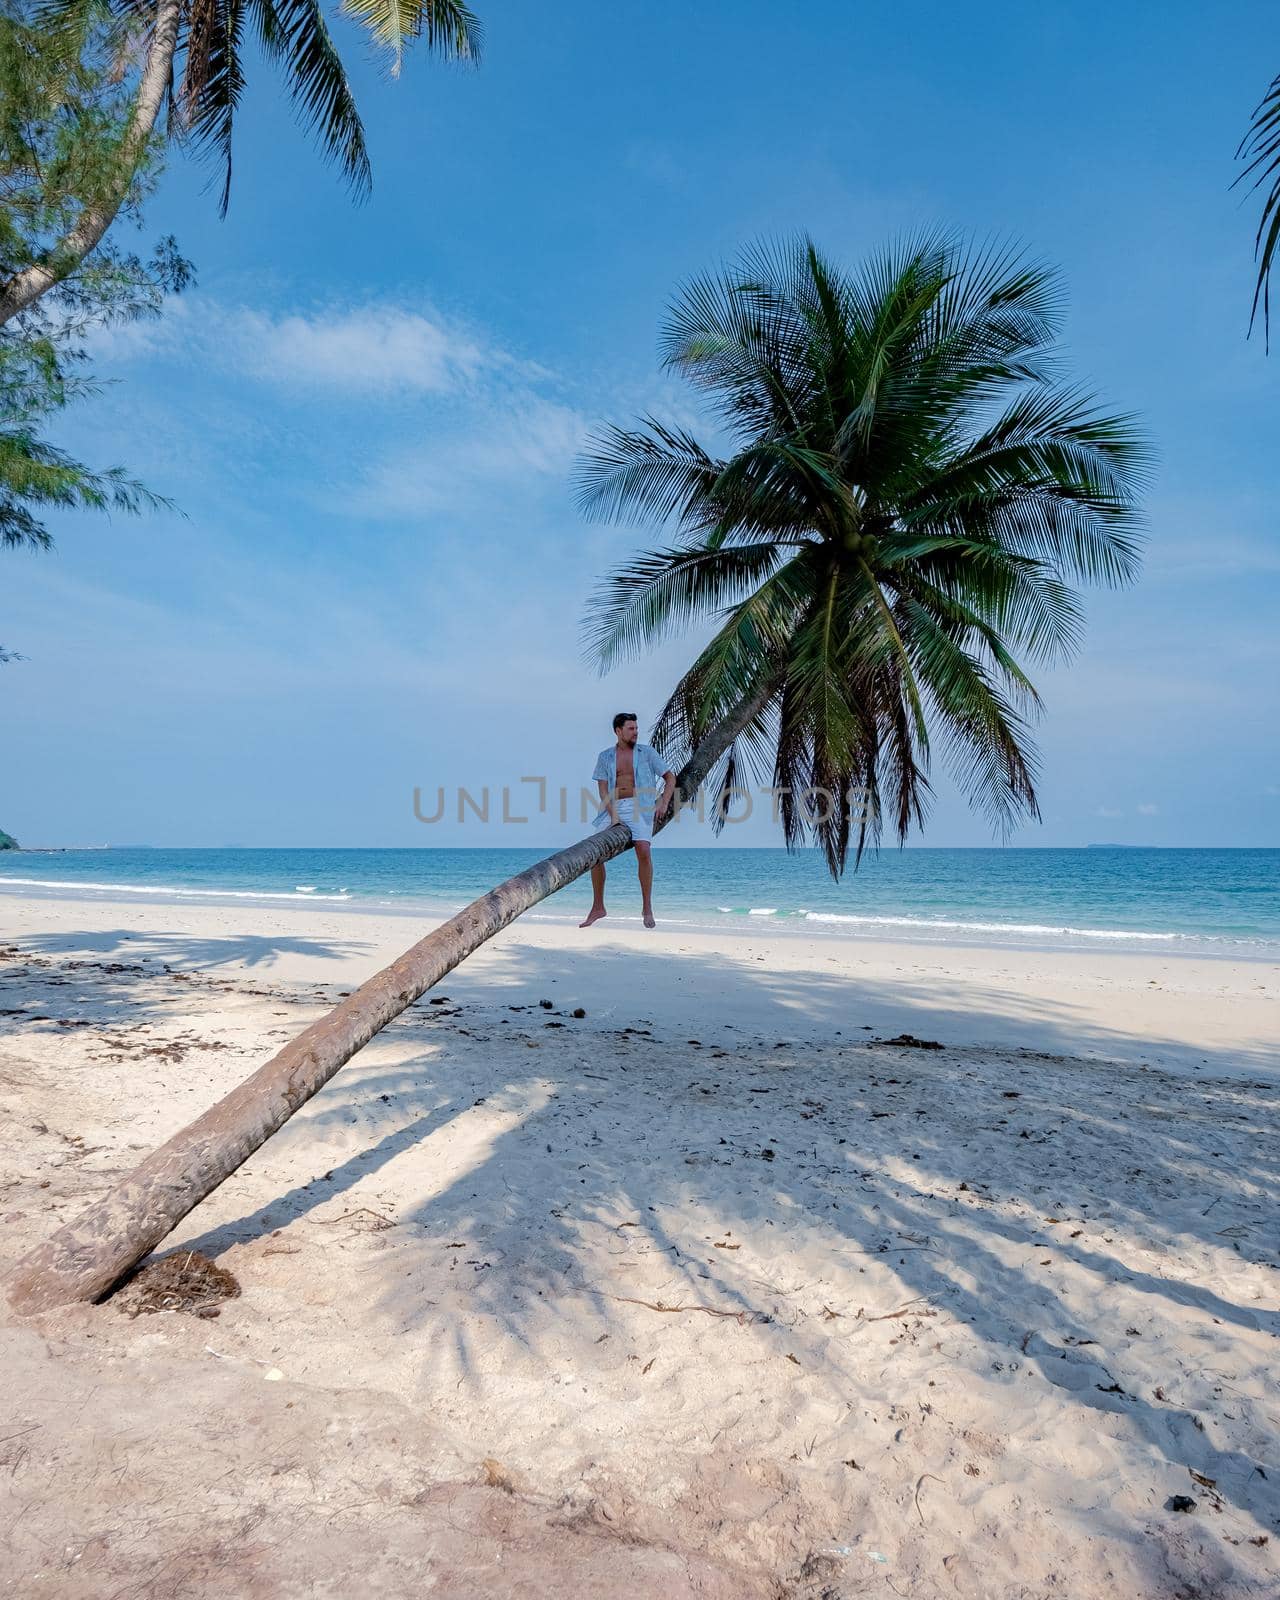 couple on vacation in Thailand, Chumpon province, white tropical beach with palm trees, Wua Laen beach Chumphon area Thailand, palm tree hanging over the beach with a couple on vacation in Thailand.